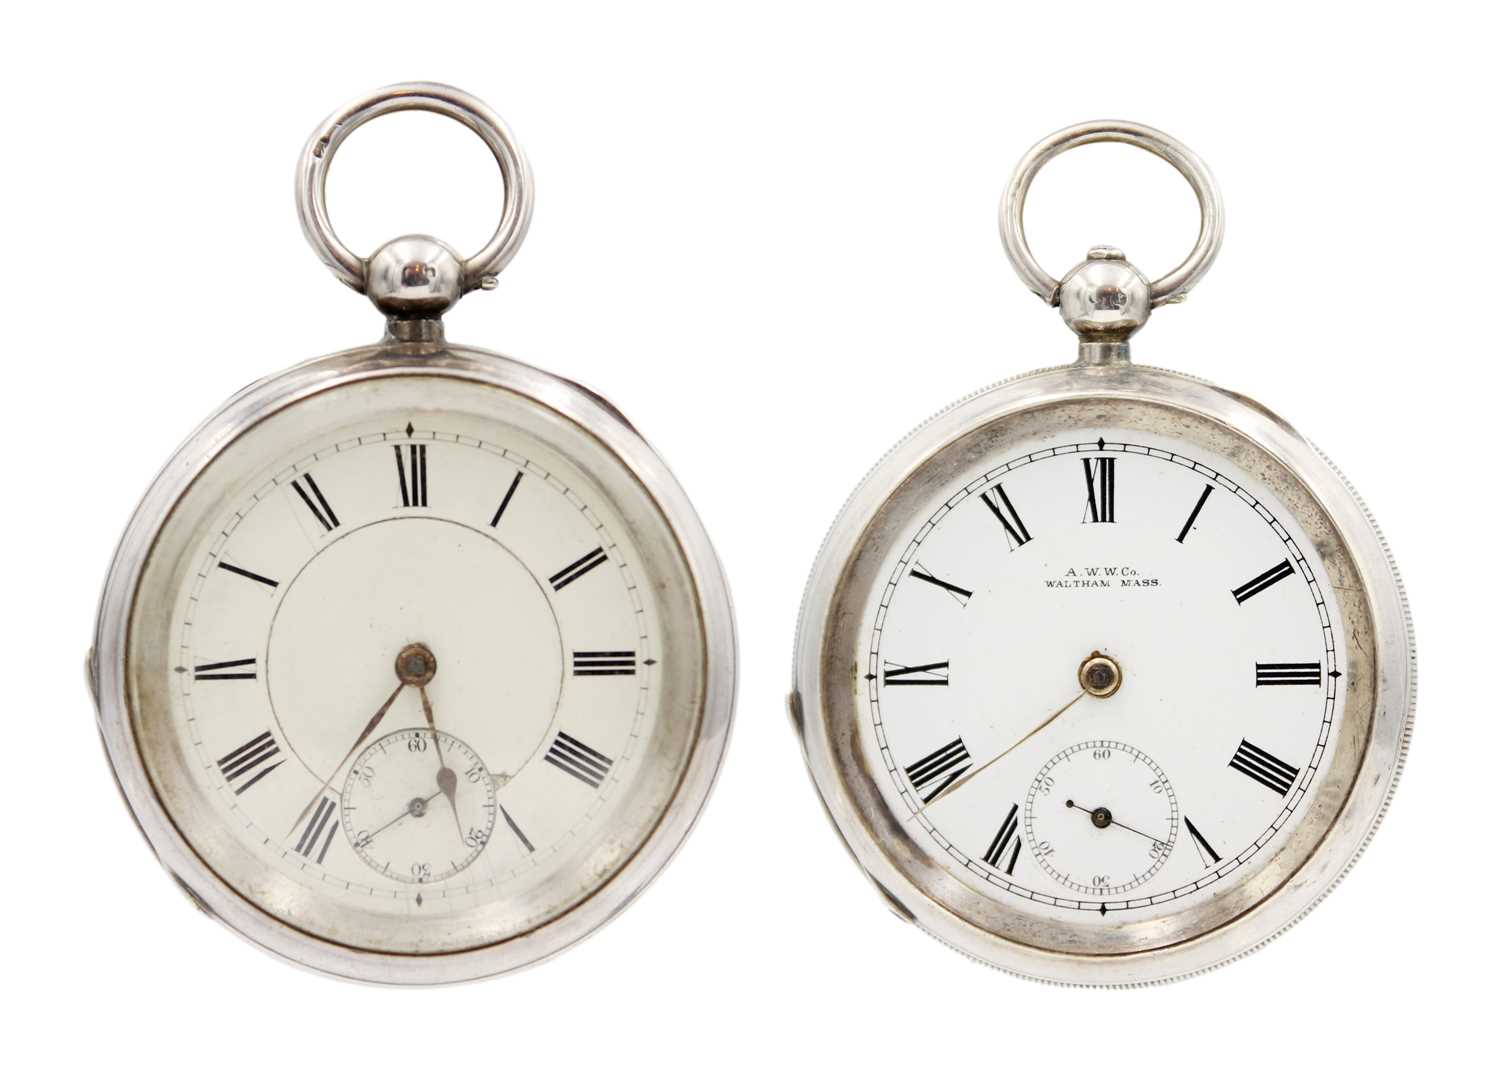 Two American Watch Co. Waltham silver-cased key wind pocket watches.